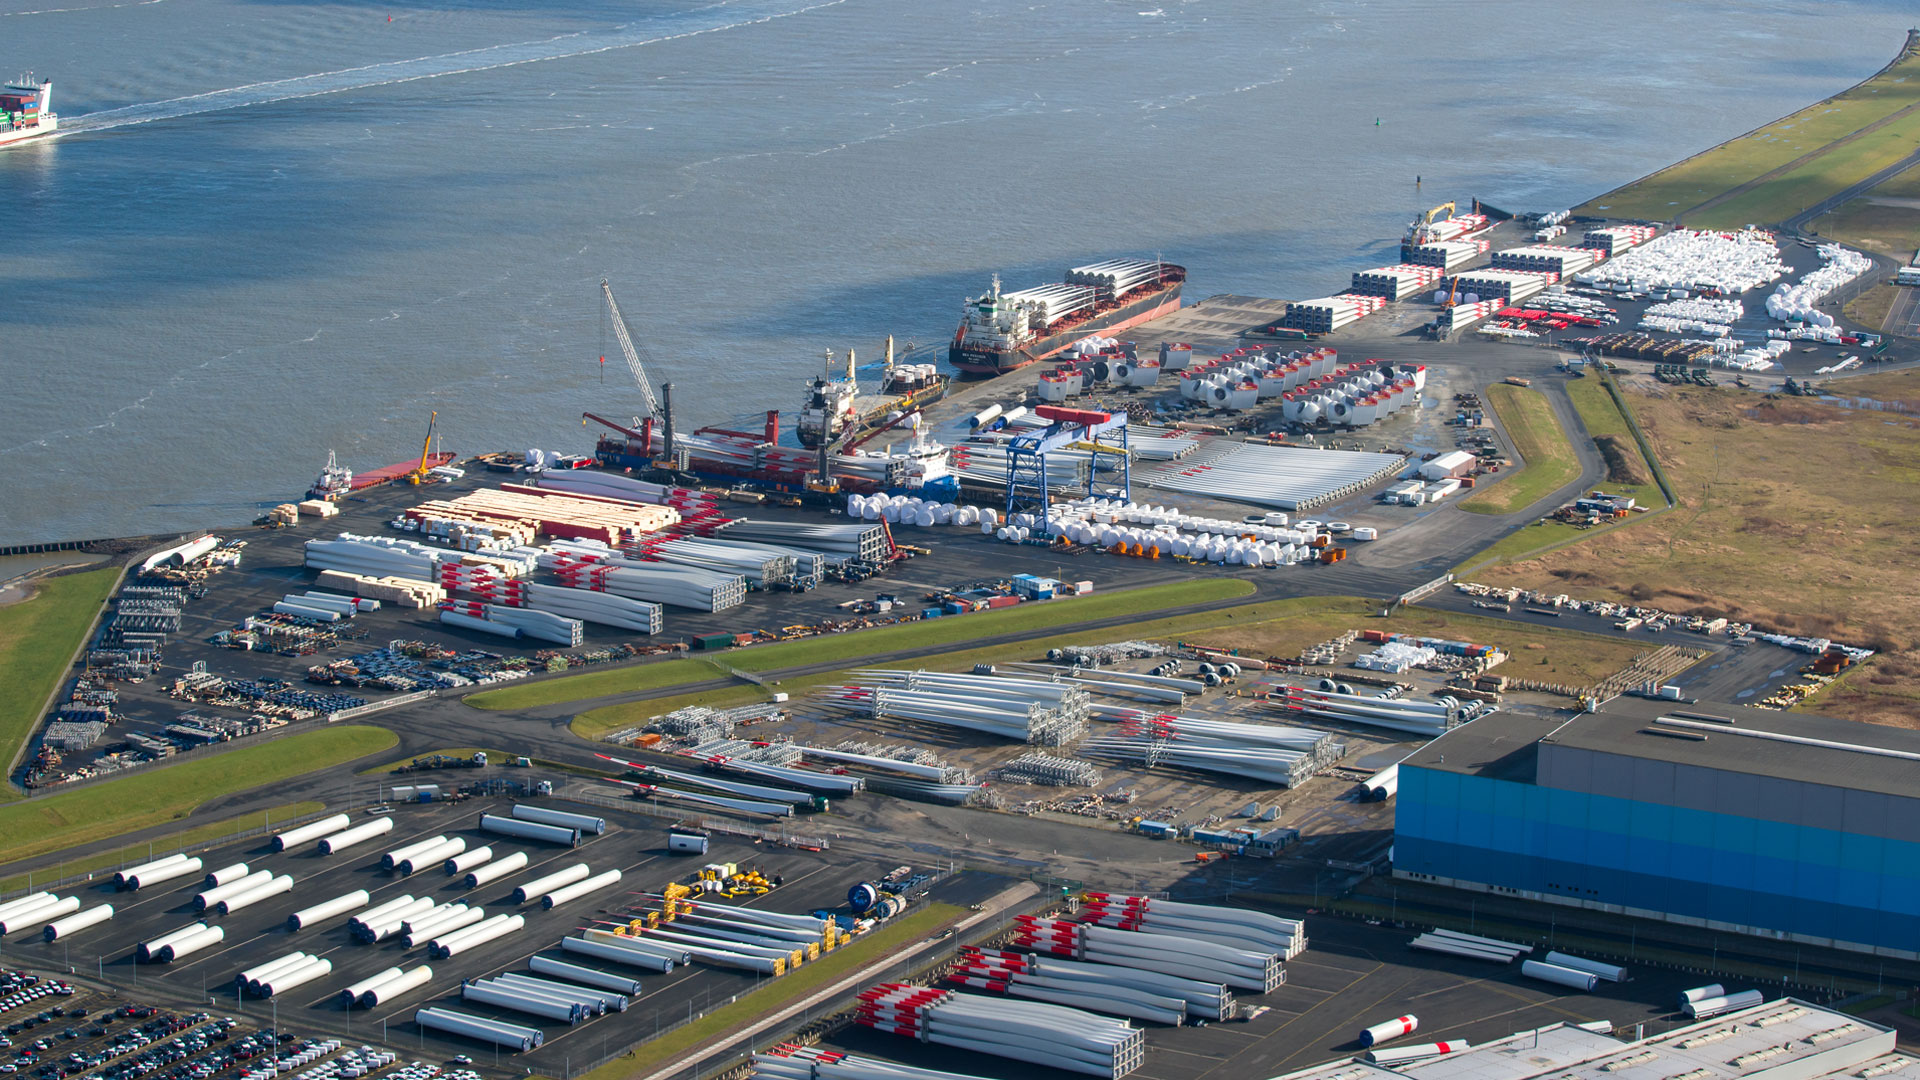 Cuxhaven focuses on energy transition